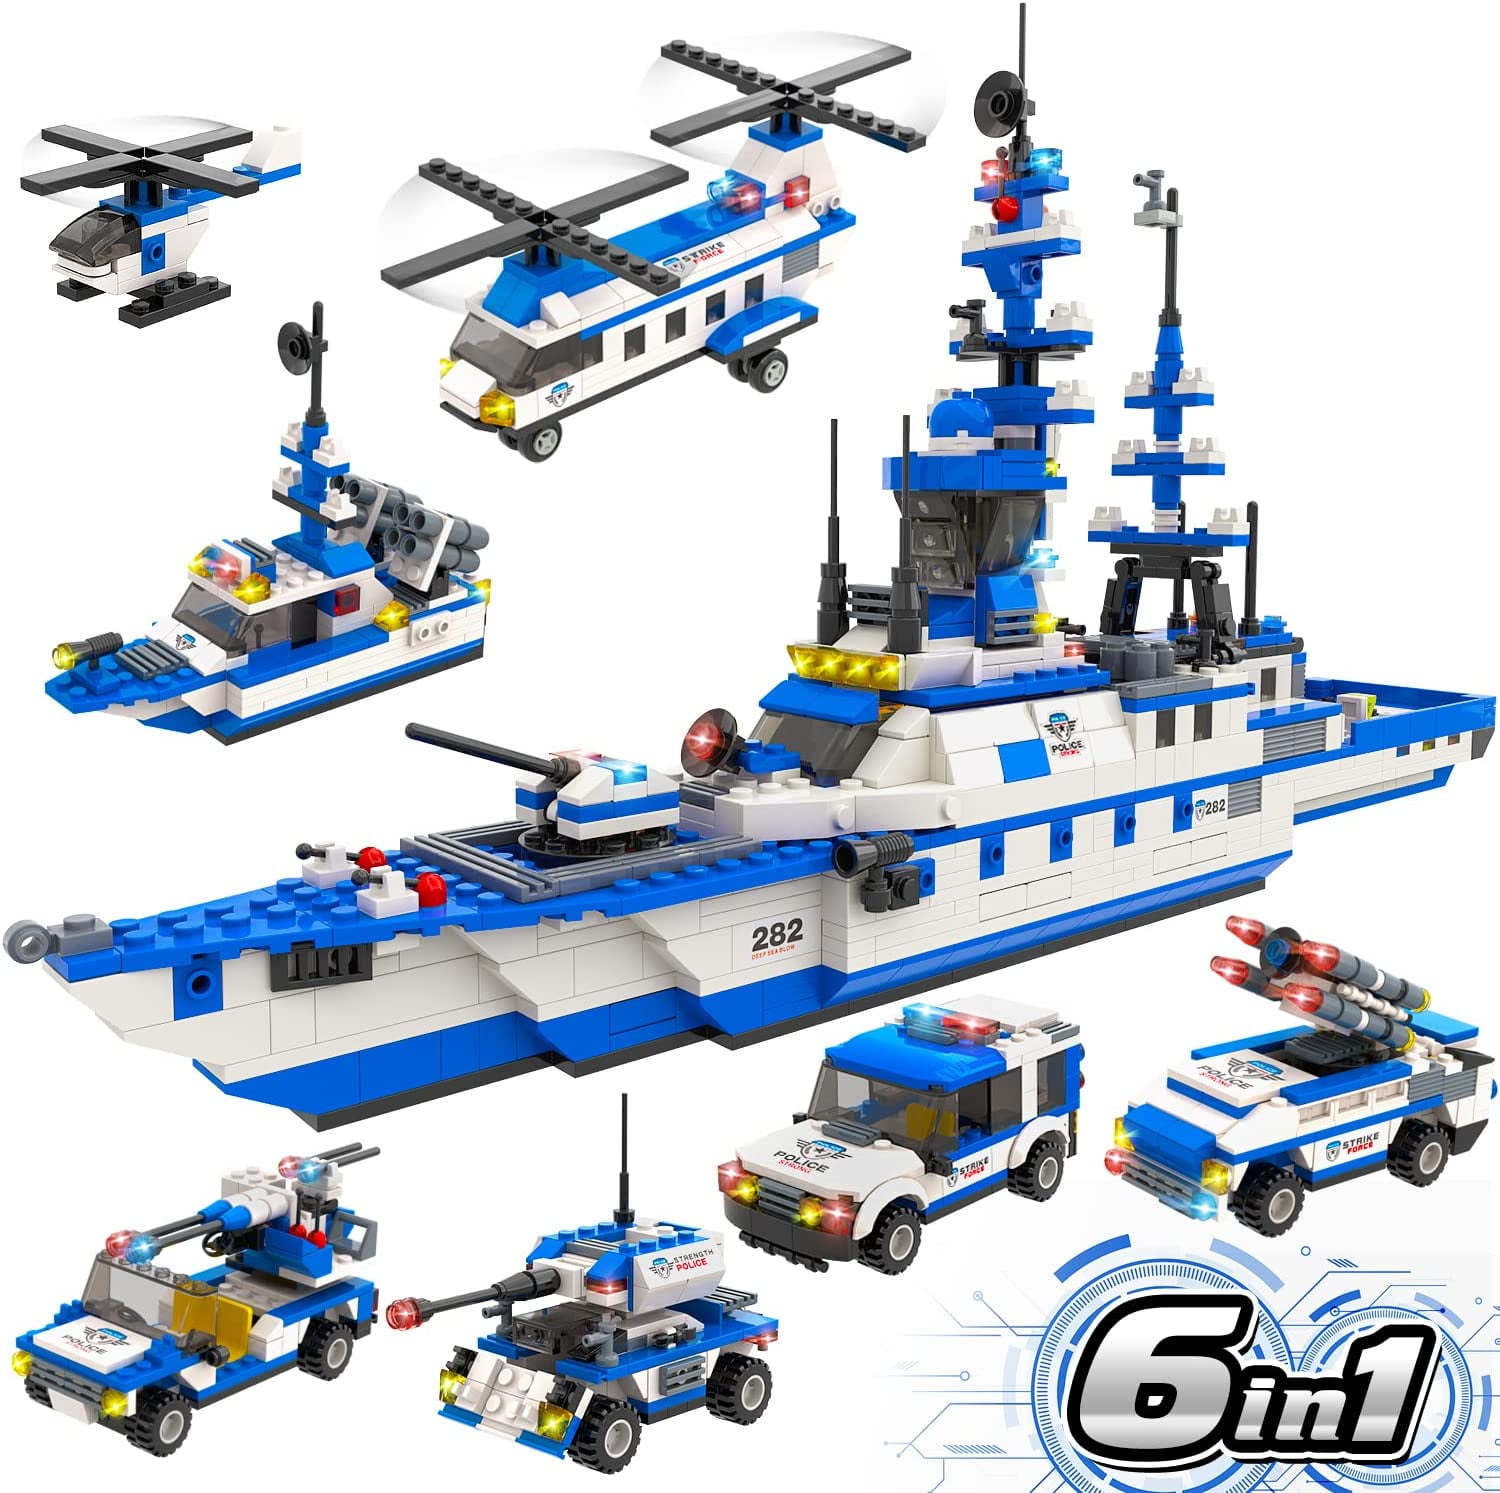 Cop Car Boat Best Learning & Roleplay STEM Construction Toys for Boys Girls 6-12 Exercise N Play 2058 Pieces City Police Building Blocks Set with Police Station Helicopter New 2021 Airplane 